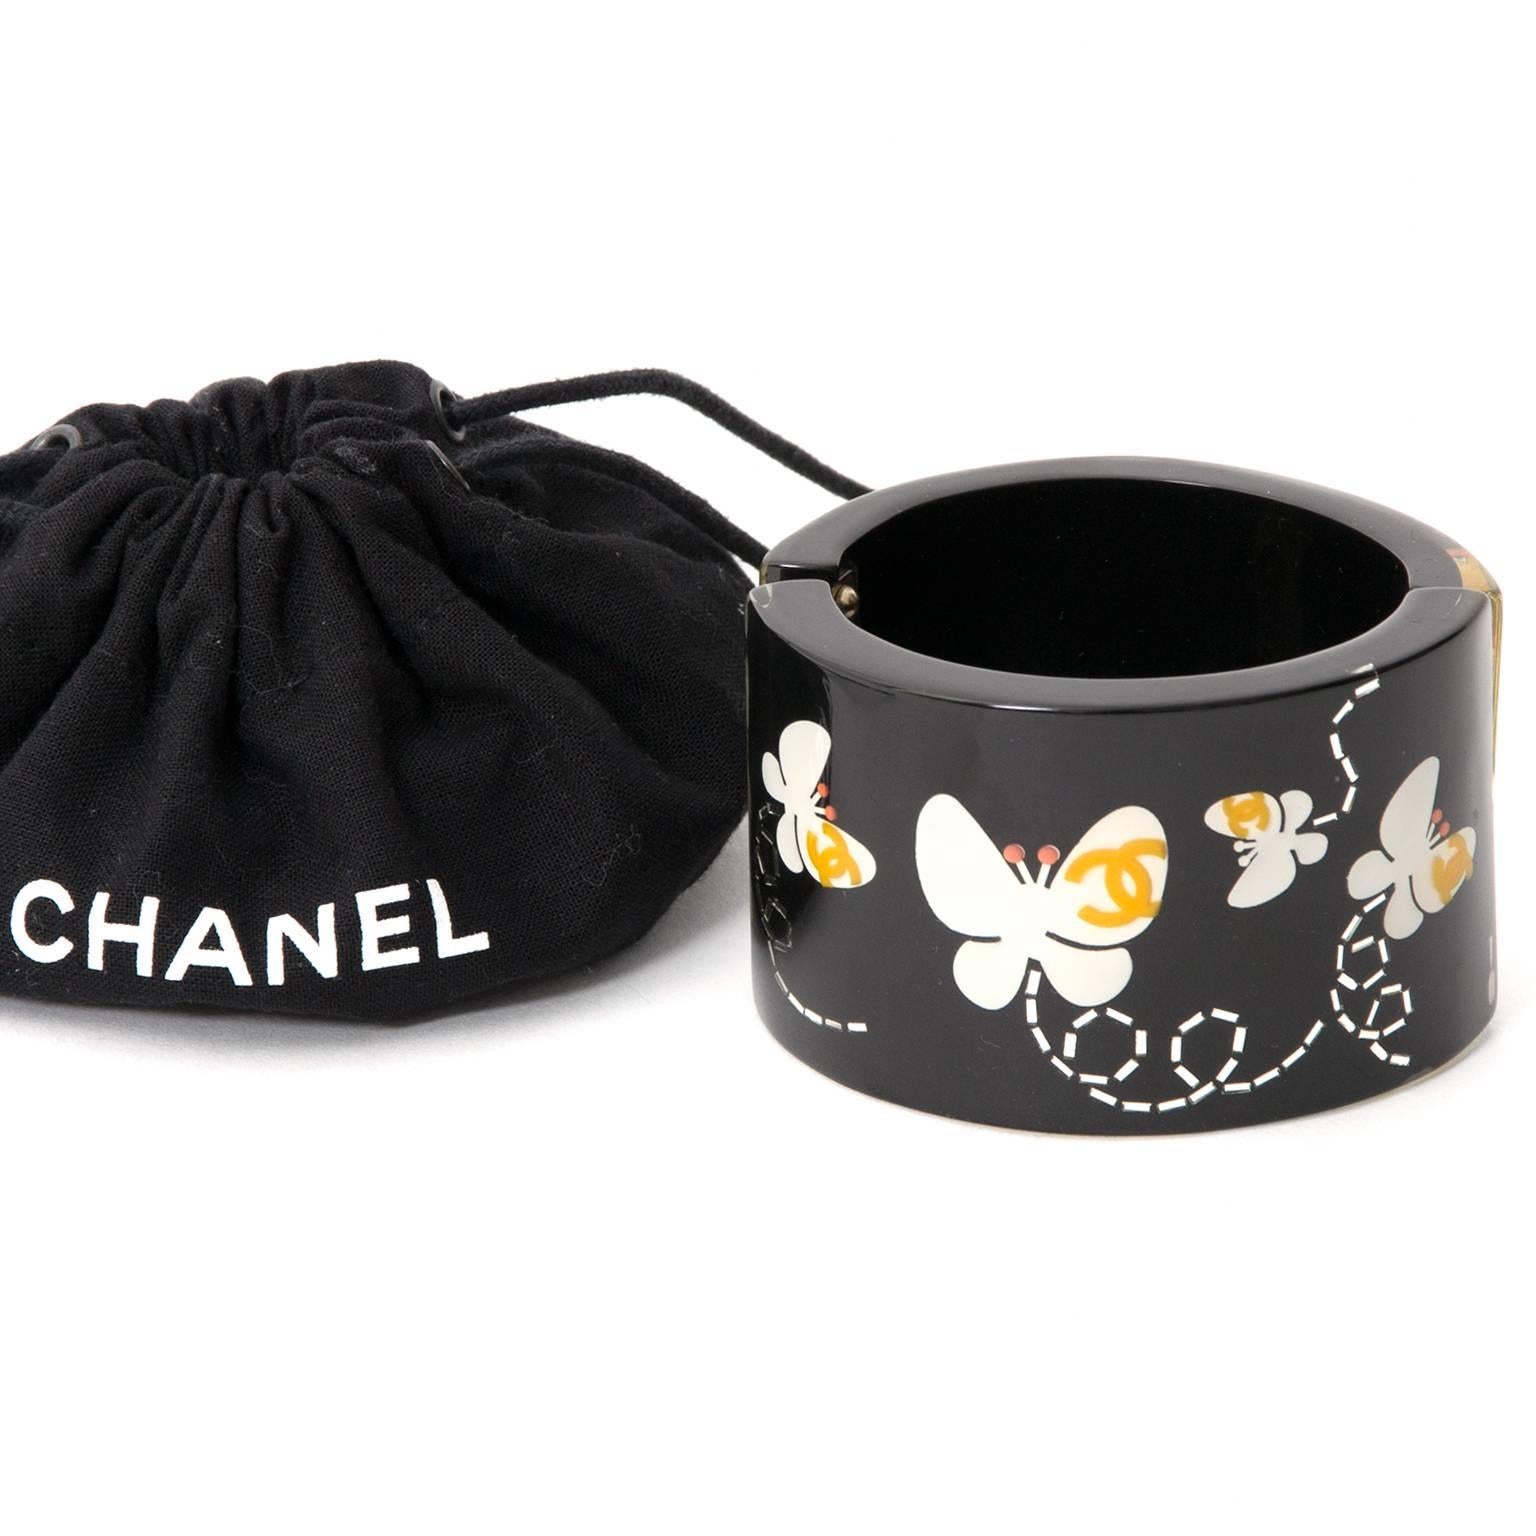 A rare Chanel cuff made of black resin with cheery butterfly and logo print. 